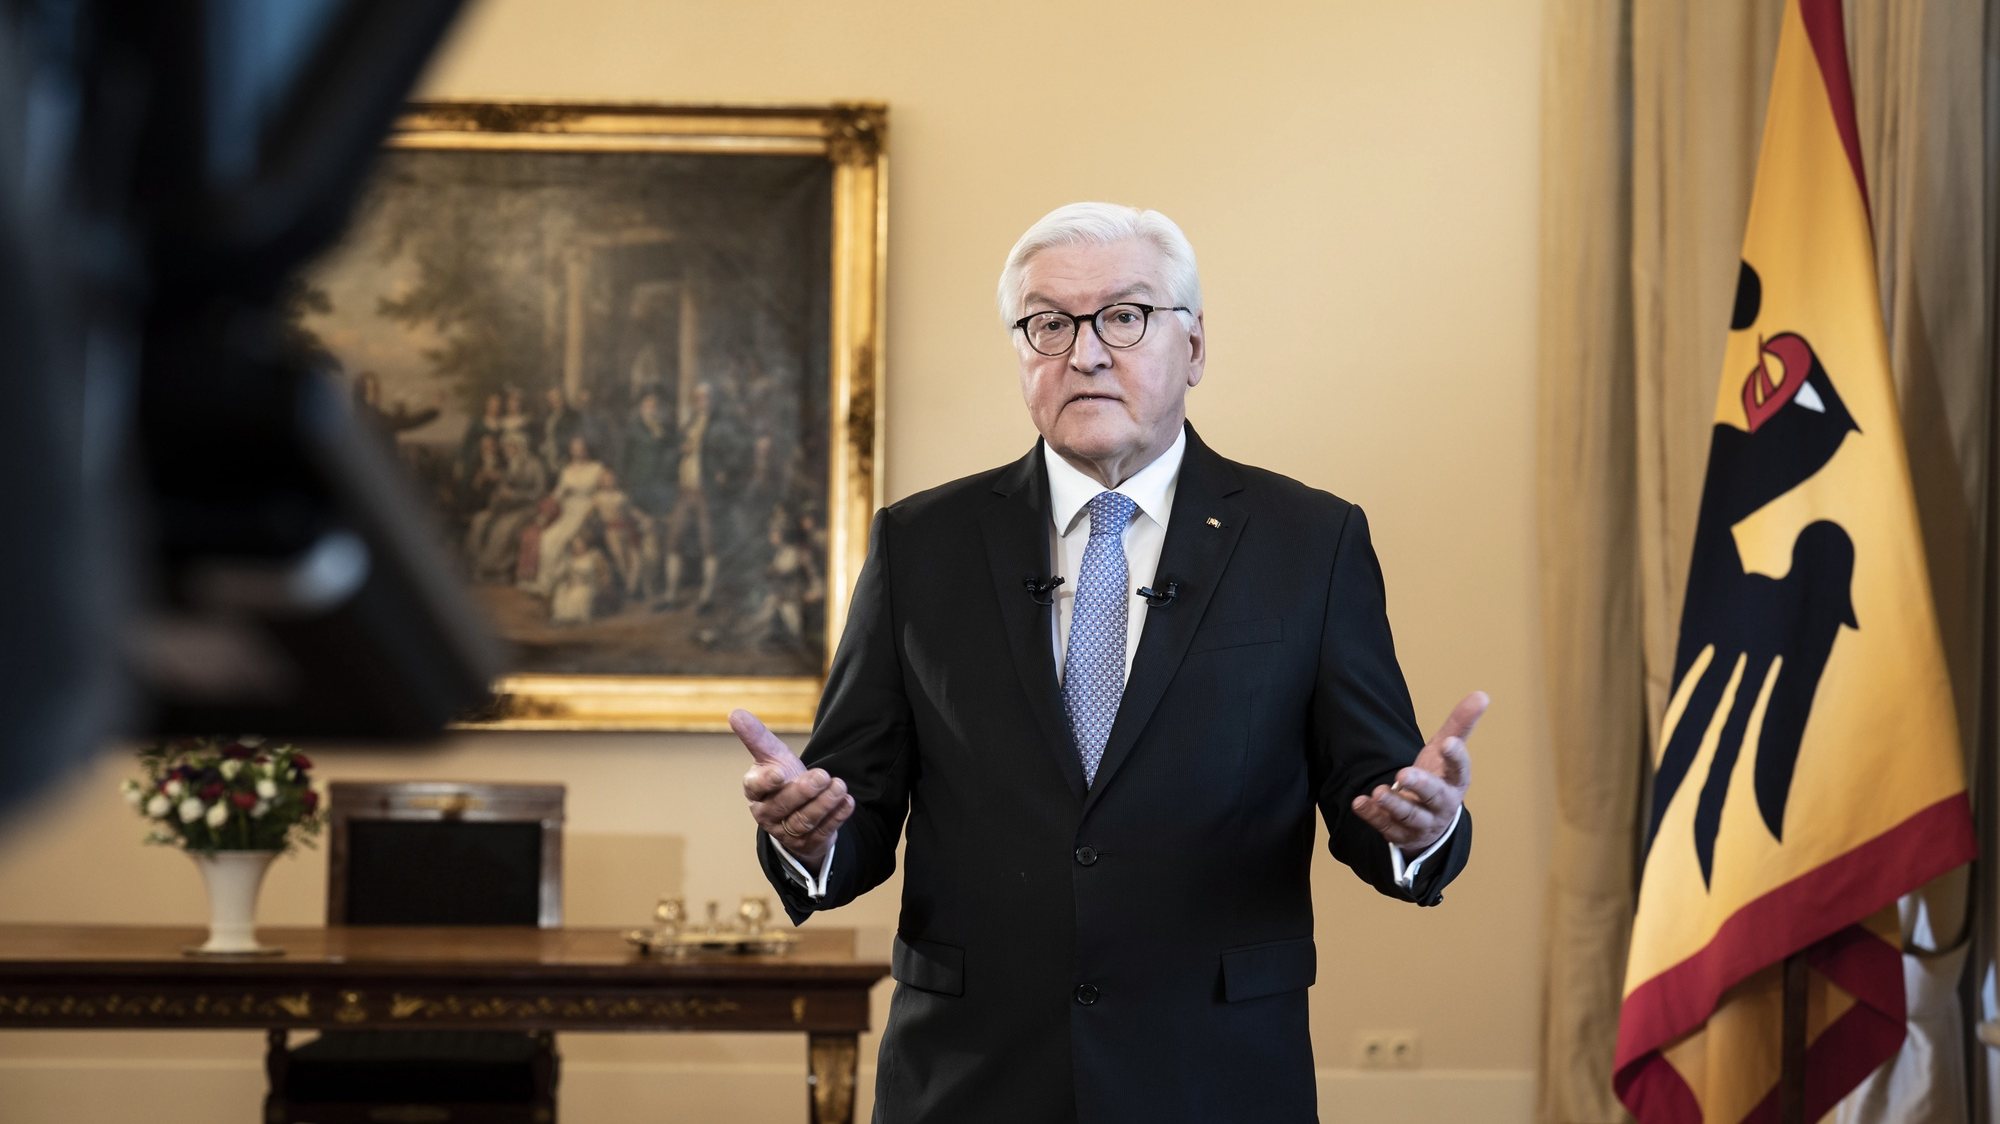 epa09112611 A handout photo made available by the German Government Press Office (BPA) shows German President Frank-Walter Steinmeier during the taping of his address to the nation, at Bellevue Palace in Berlin, Germany, 02 April 2021. Steinmeier addressed the population on the current pandemic coronavirus situation.  EPA/Sandra Steins / BPA HANDOUT  HANDOUT EDITORIAL USE ONLY/NO SALES